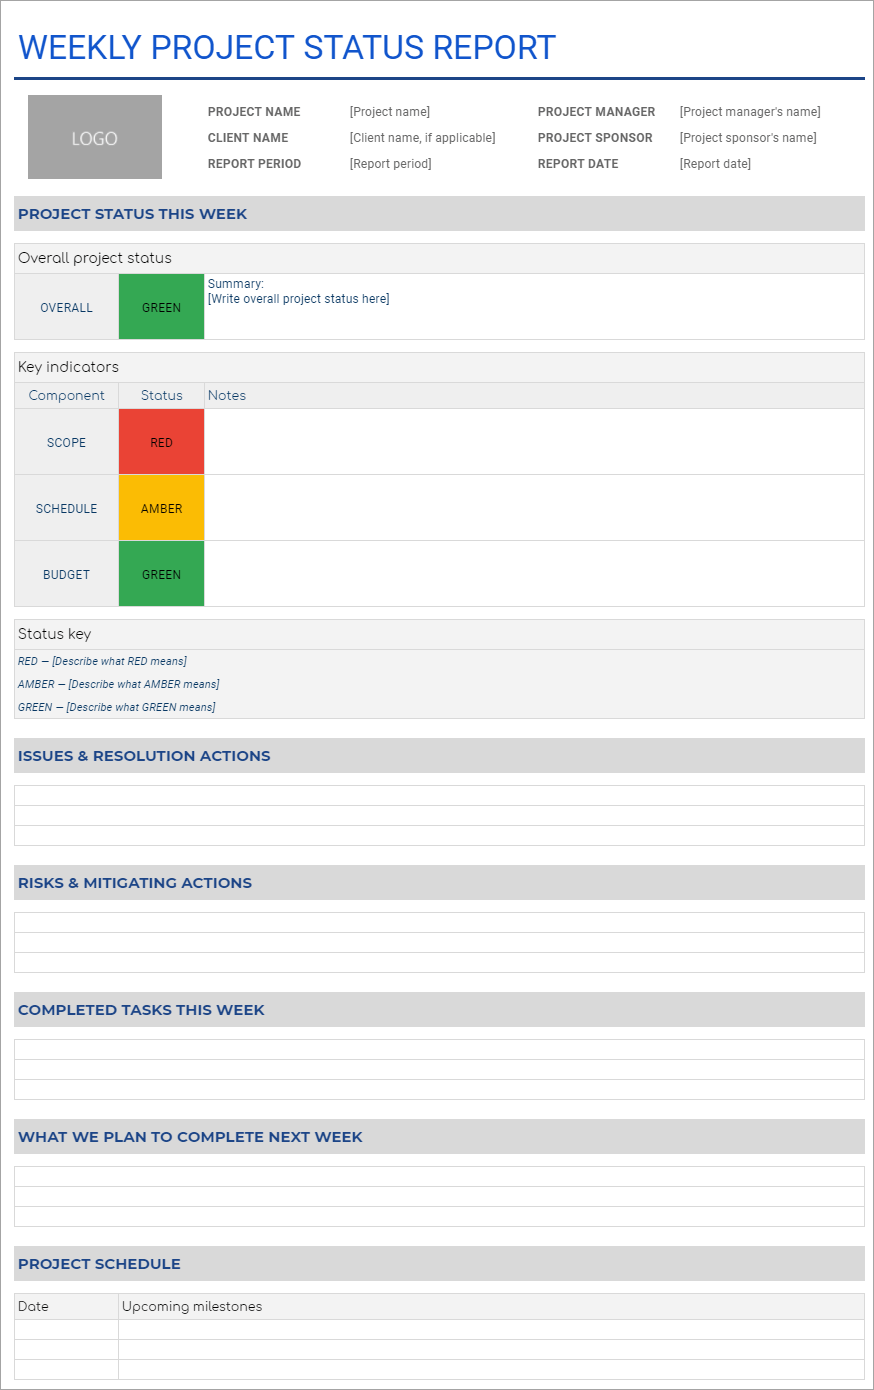 Project Status Report Template in Google Sheets  Coupler